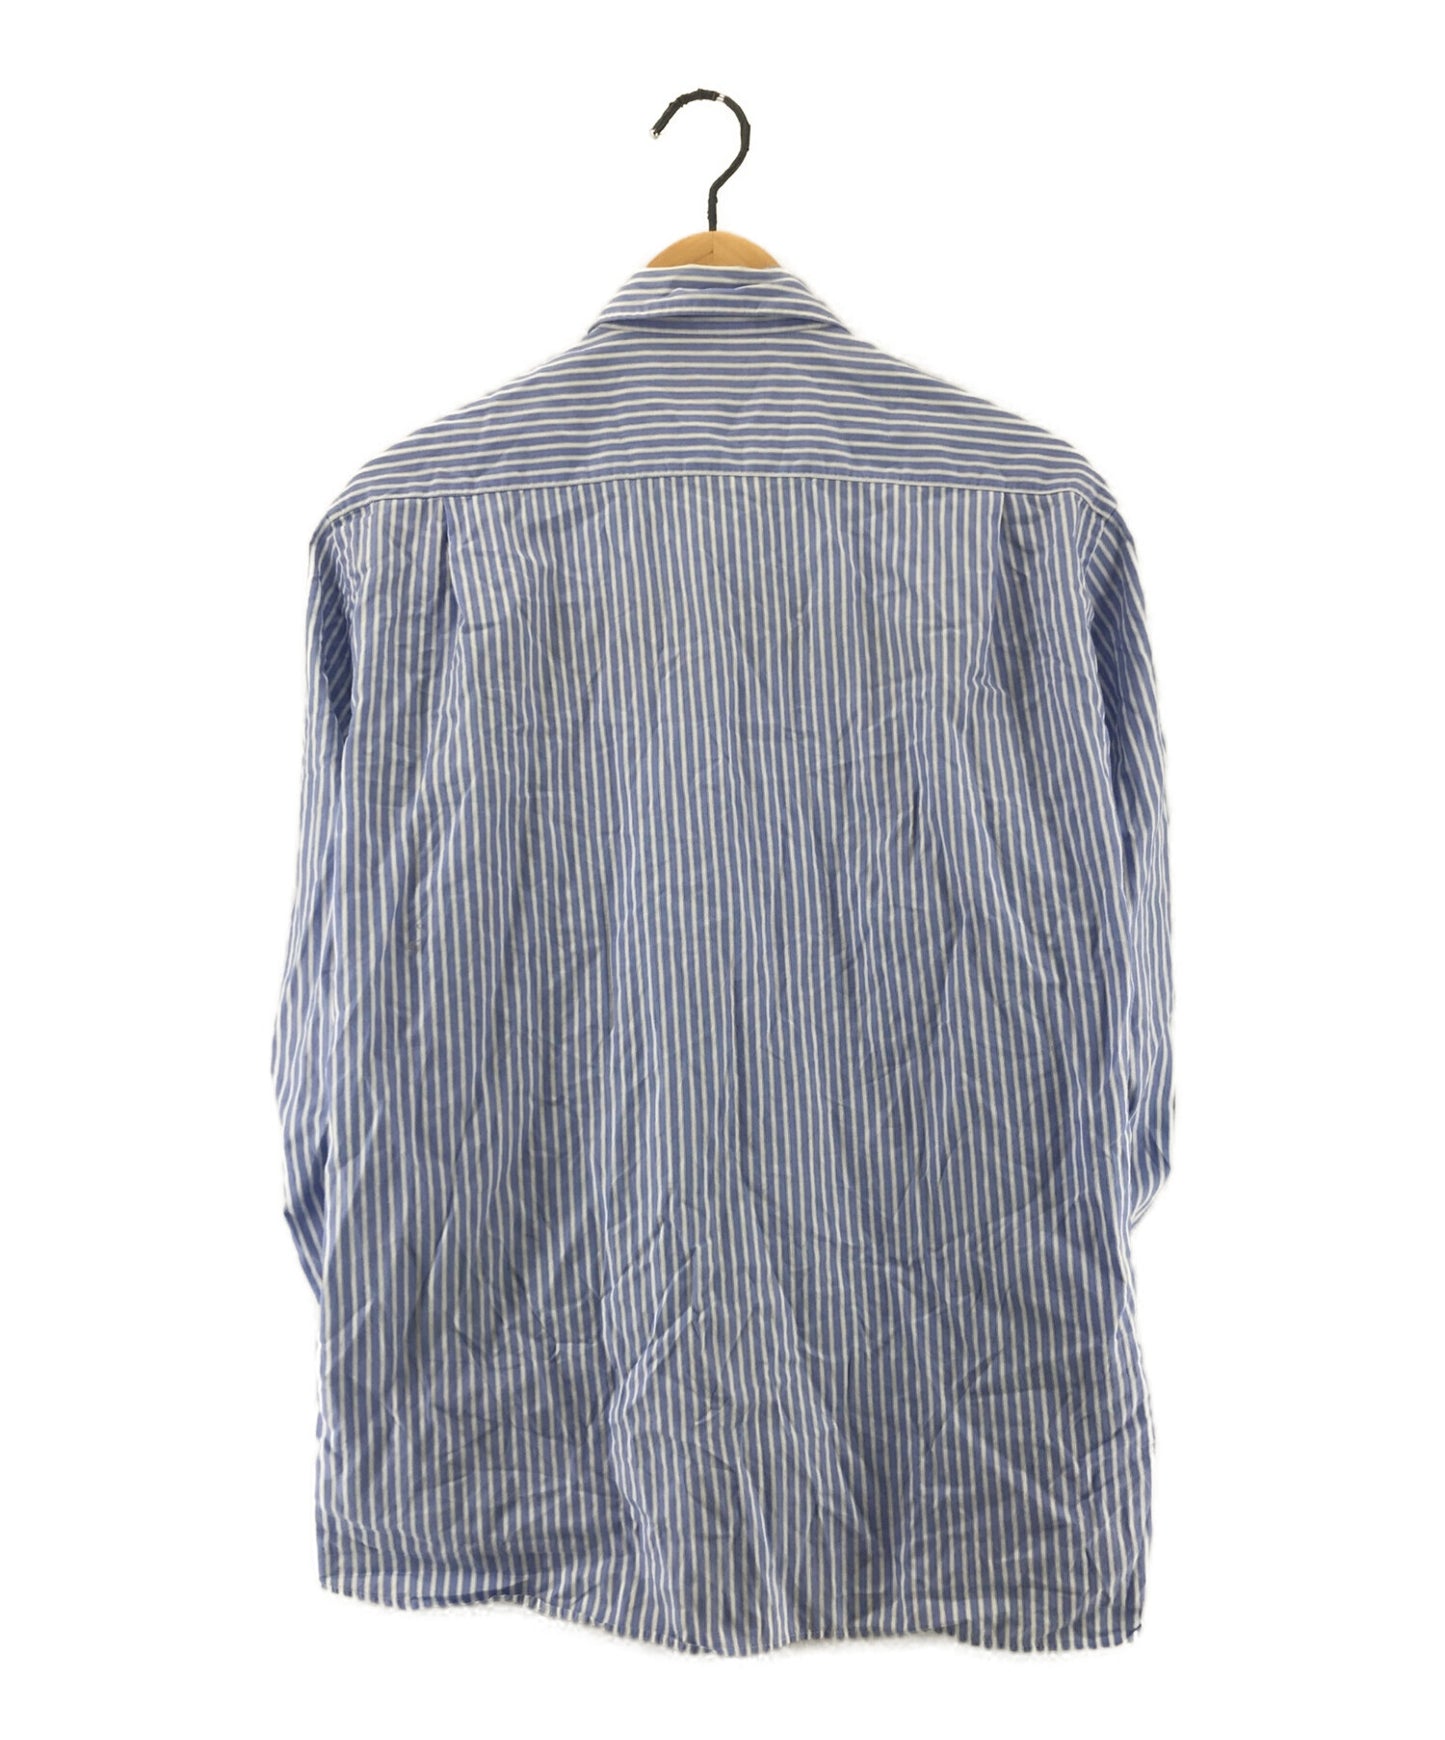 Comme des Garcons Homme Wool Switching Packing Stripe Shirt HH-B028